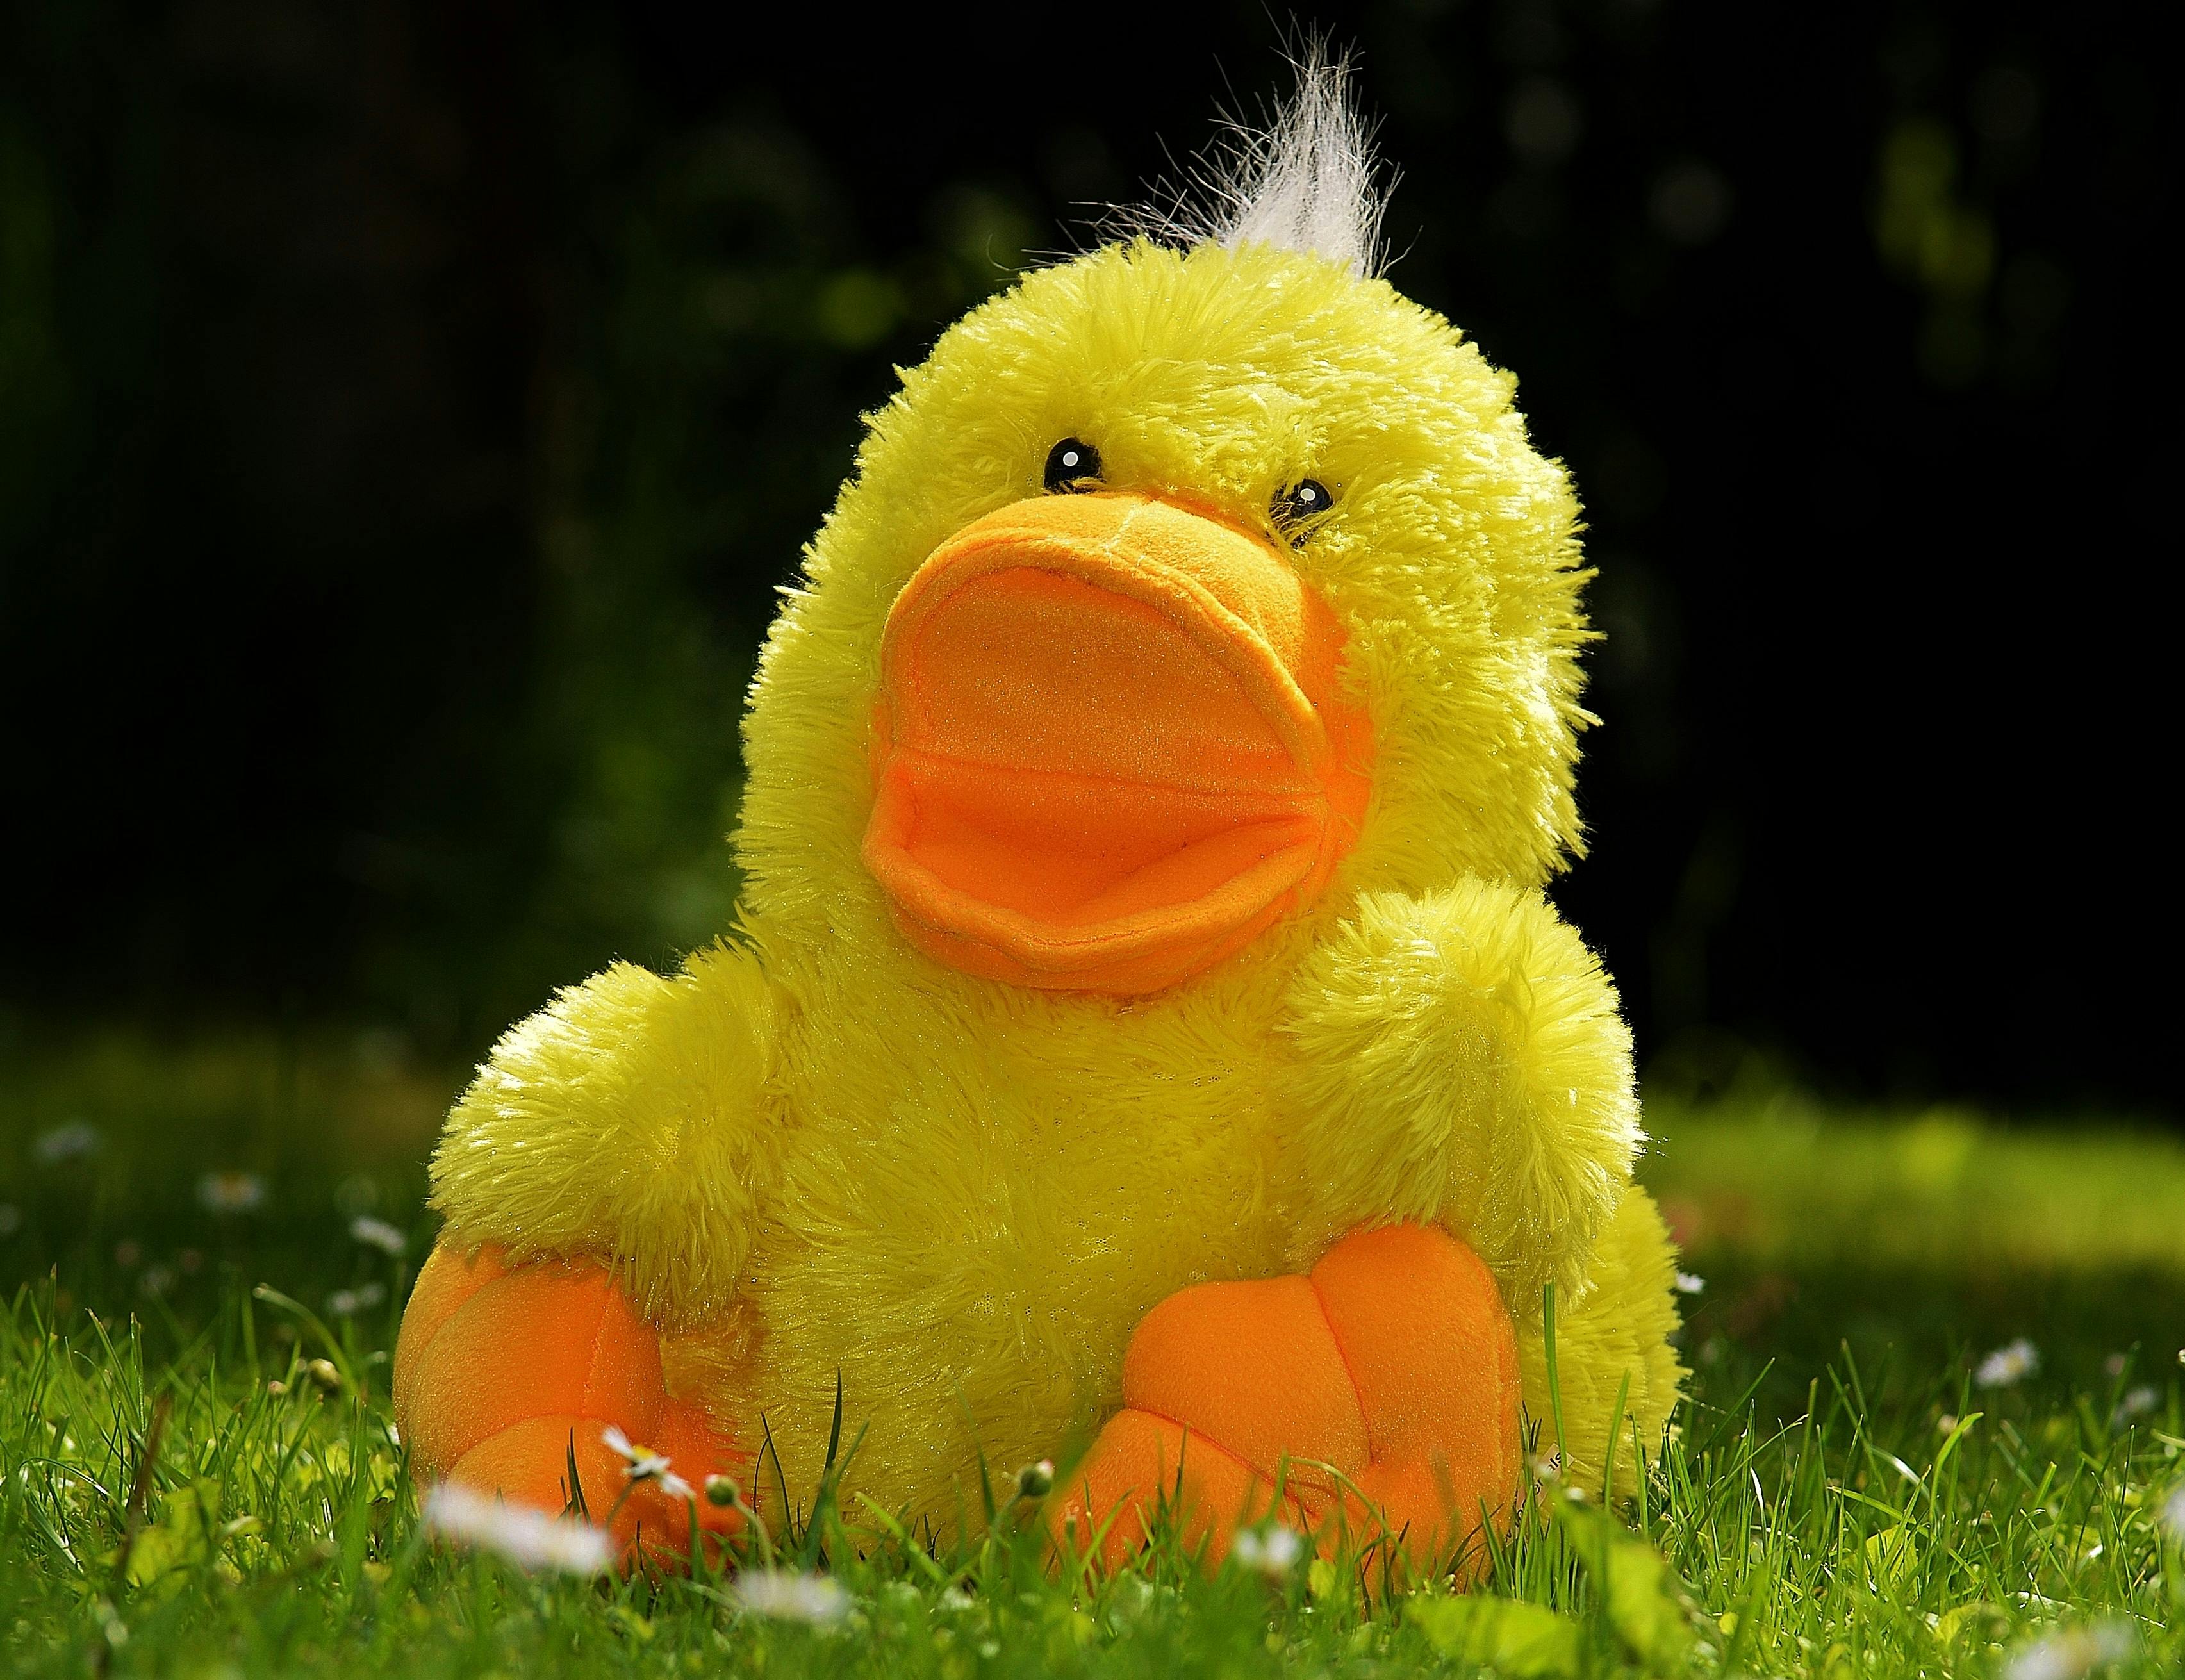 duck-funny-soft-toy-toys.jpg (3410×2622)